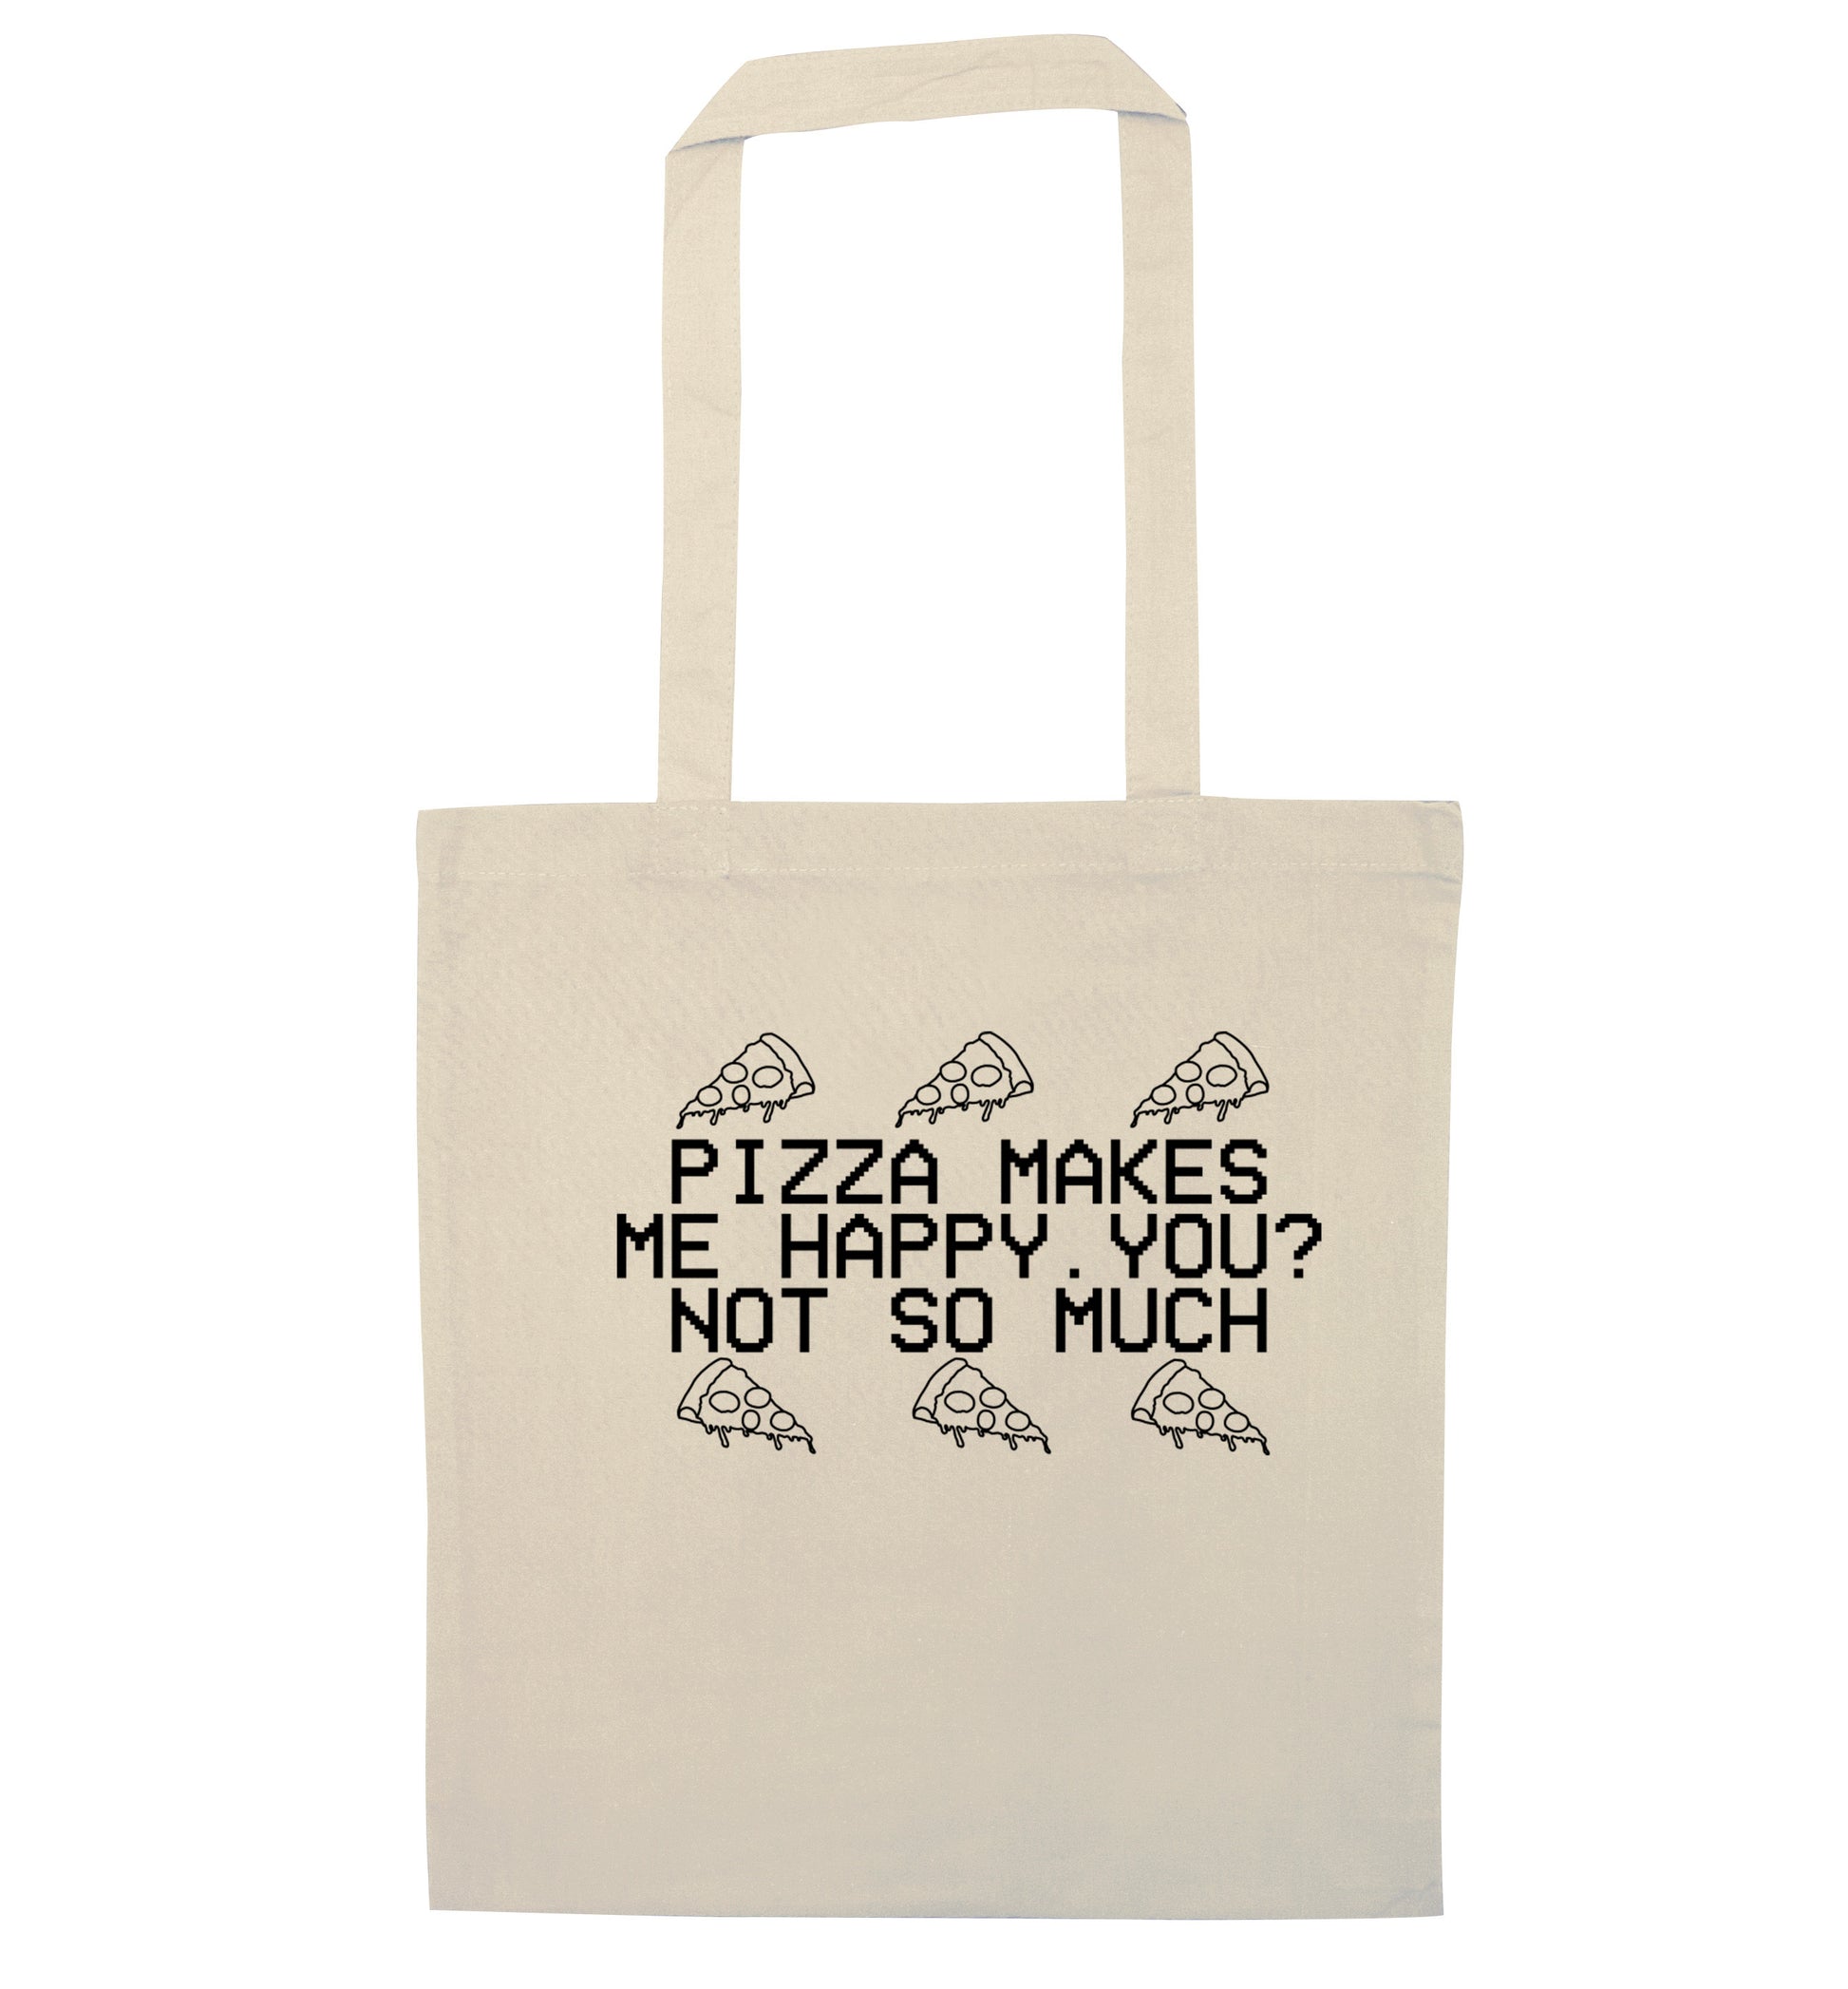 Pizza makes me happy, You? Not so much natural tote bag